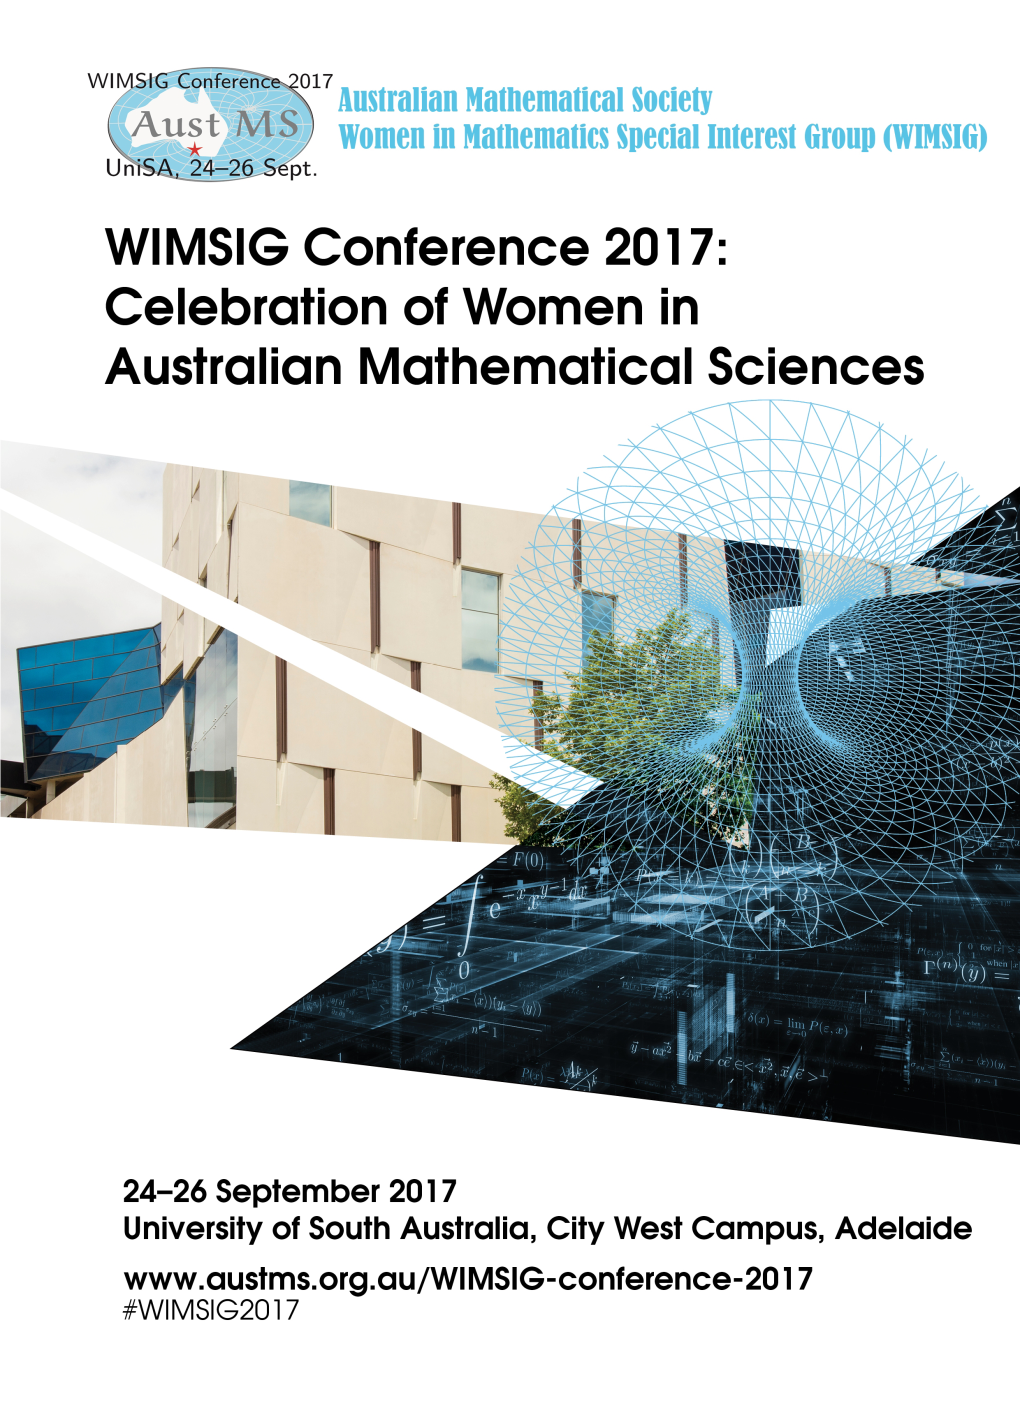 Conference Booklet • Travel Grants Assisting More Than 30 Women Participants • Information Session on the Austms WIMSIG Cheryl E